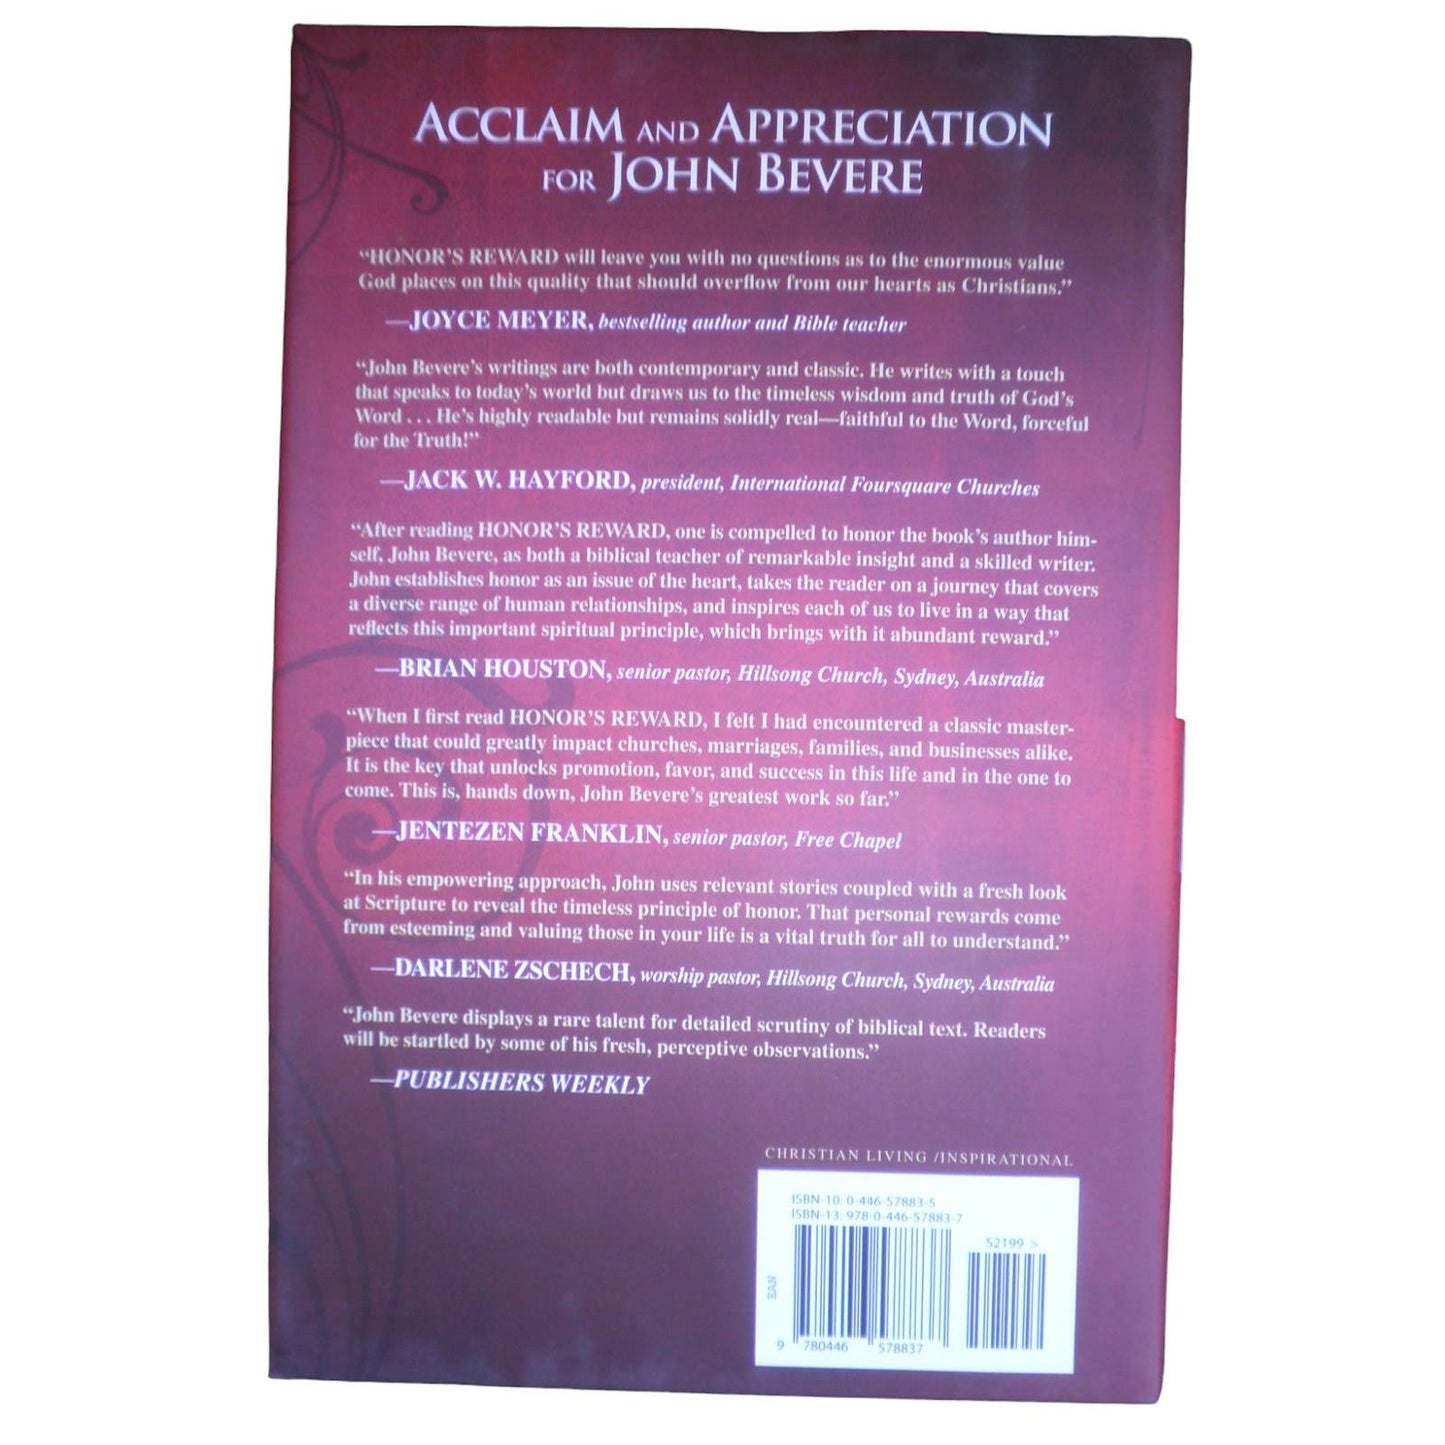 Honor's Reward: How to Attract God's Favor and Blessing Hardcover, 11-15-2007